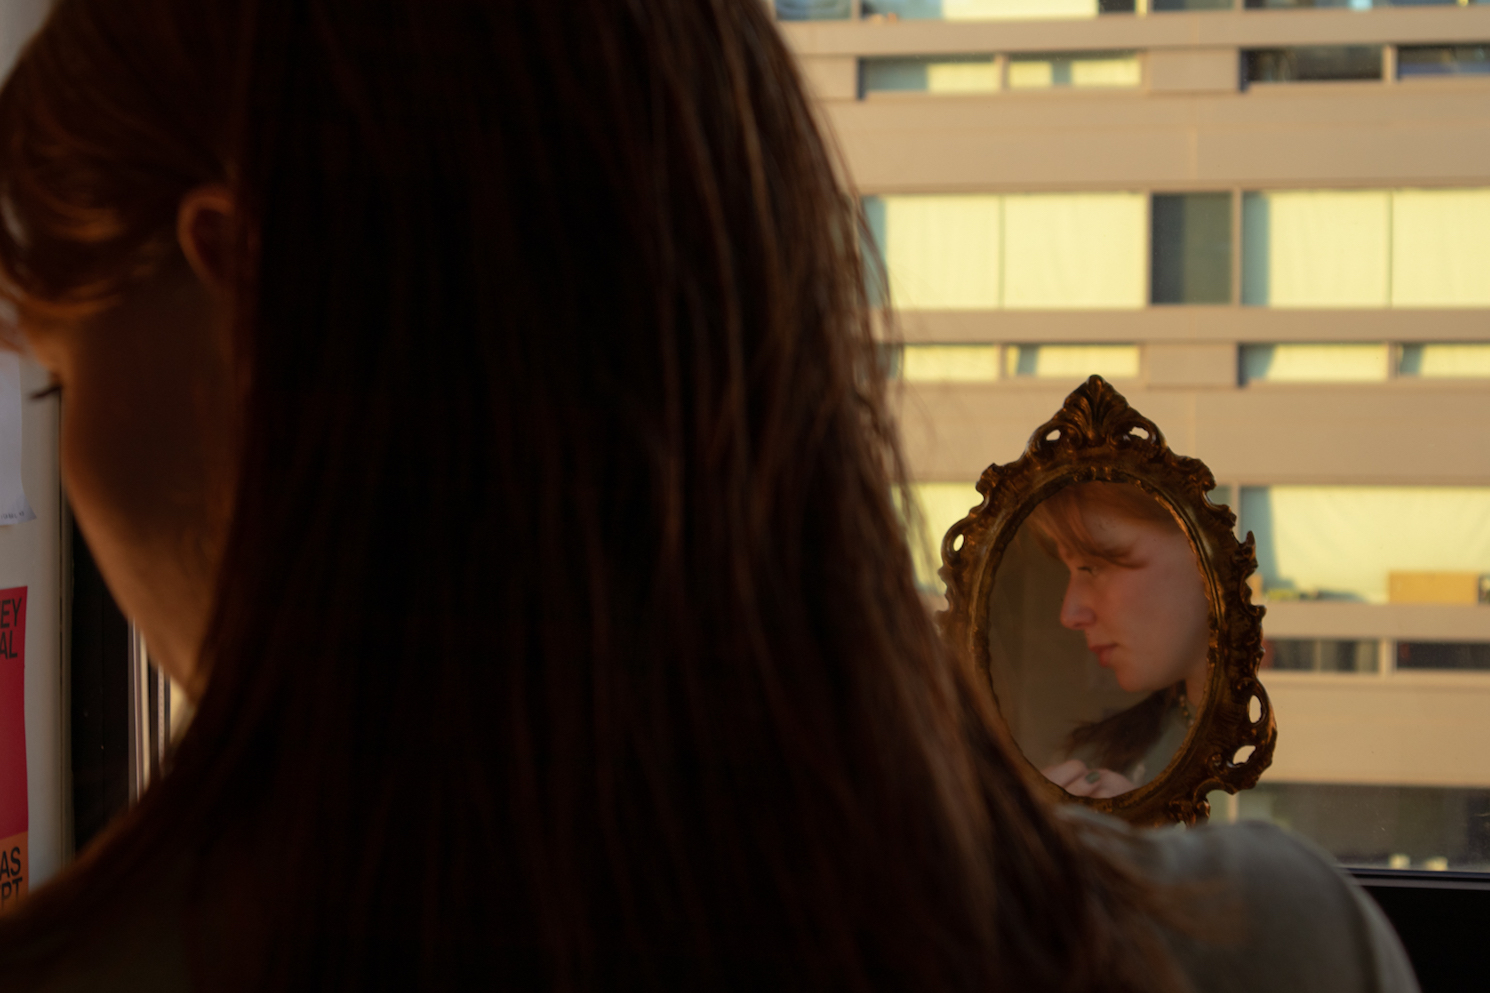 A girls looks onto the ground in front of a makeup mirror in her dorm room.